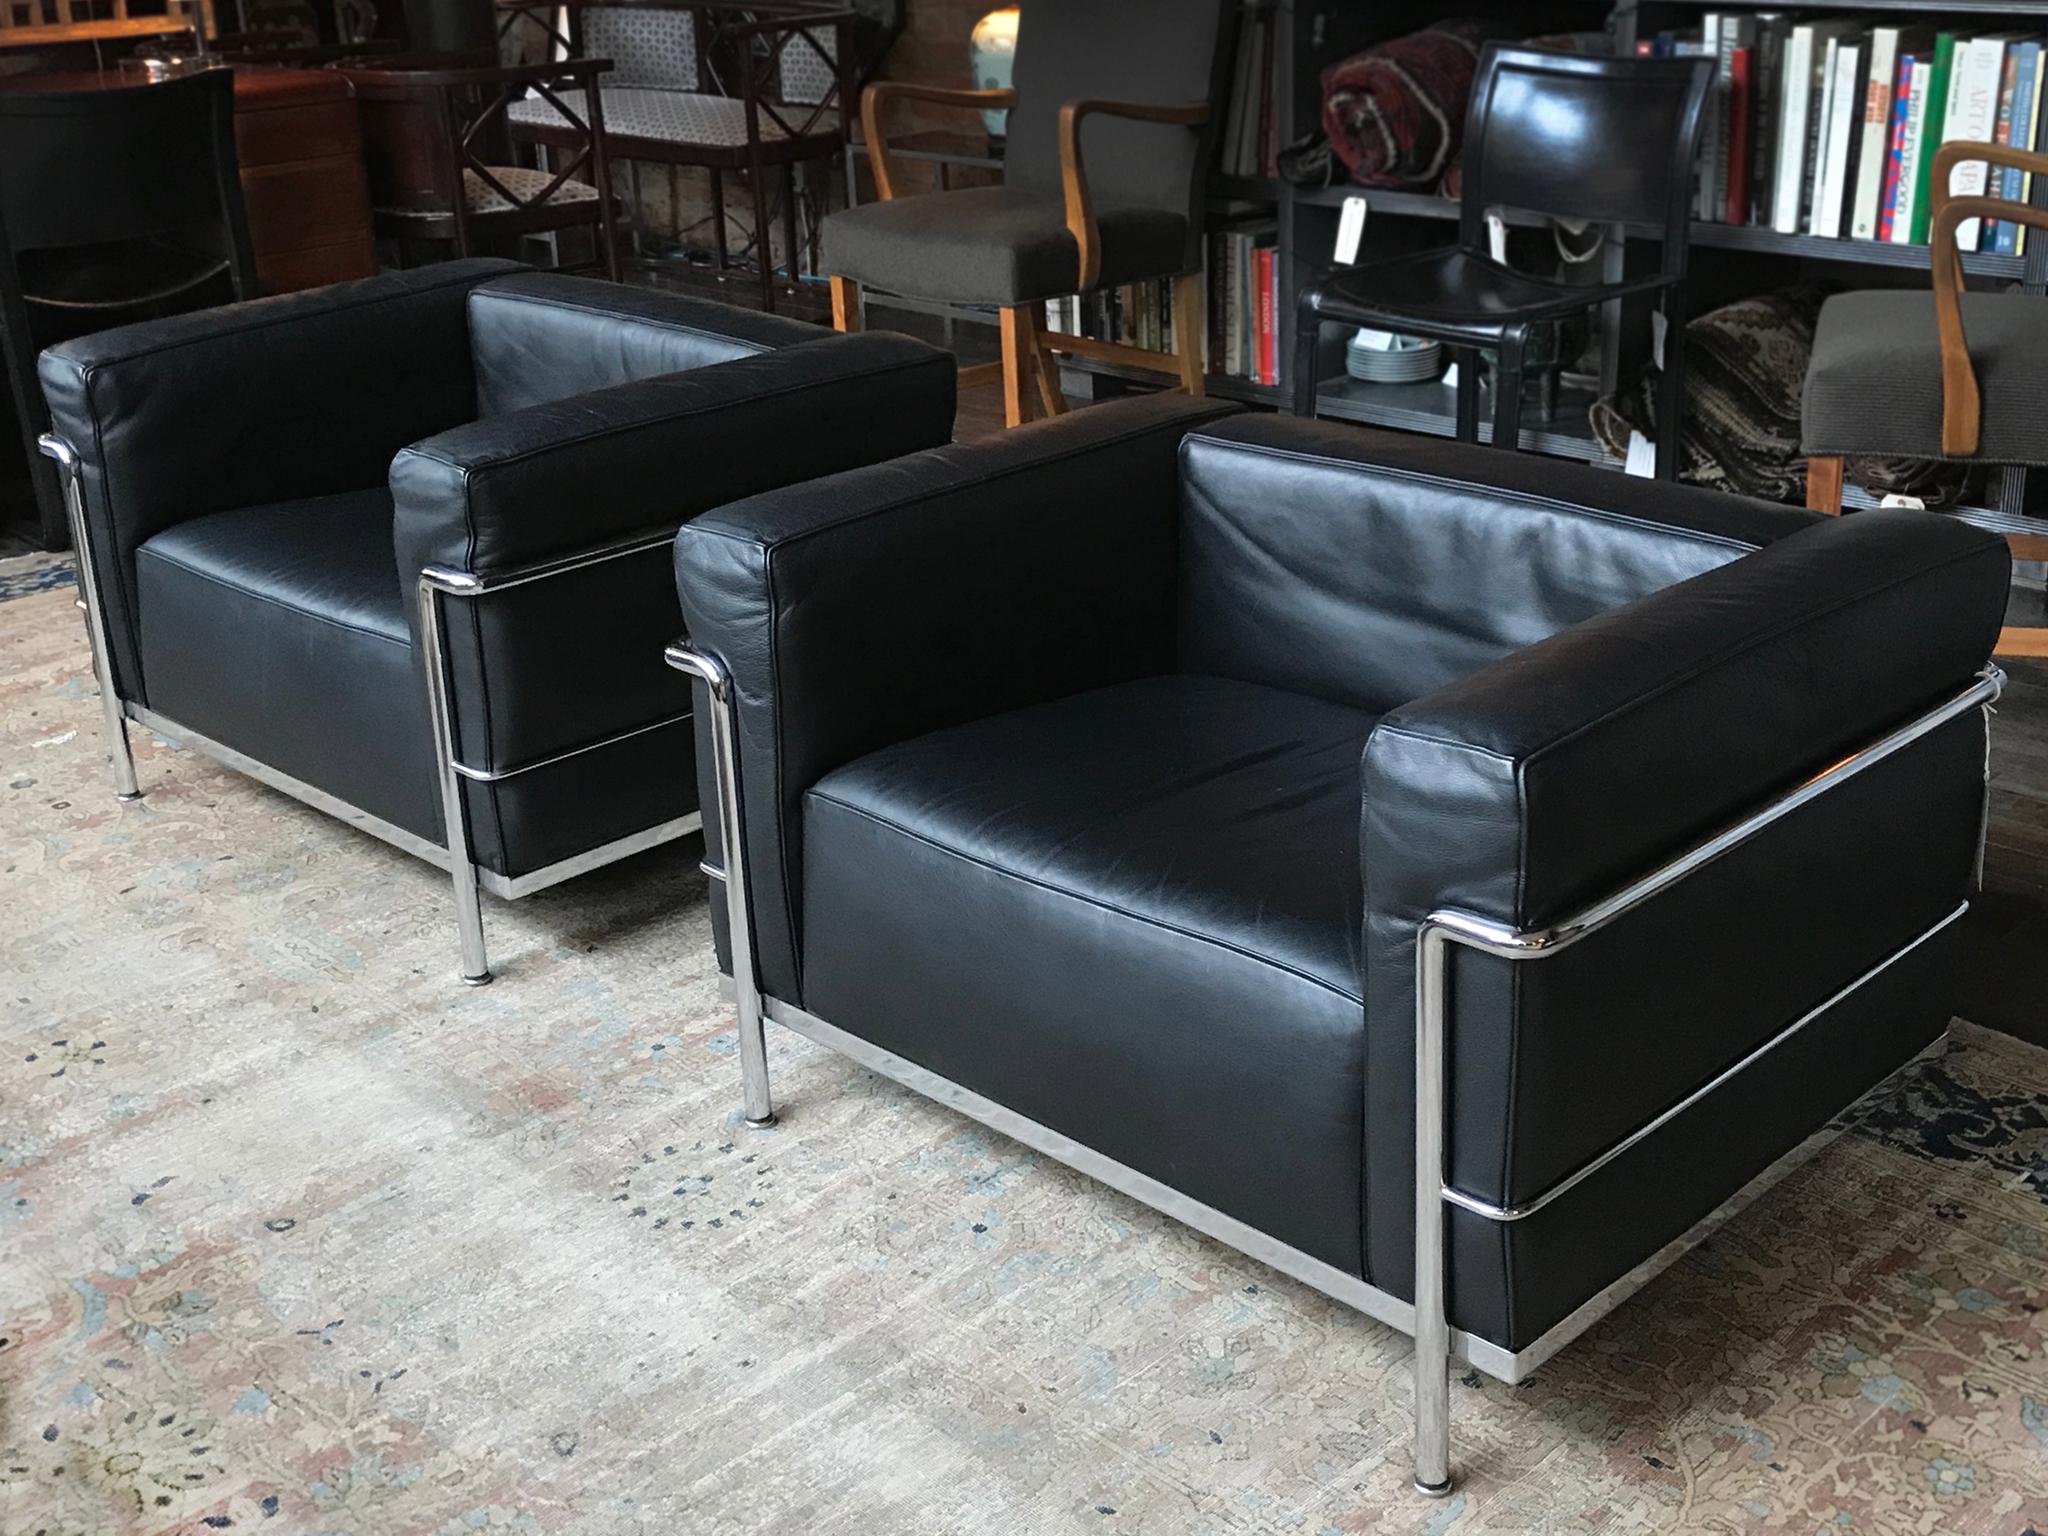 A pair of the iconic Bauhaus LC3 club chairs. Conceived by Le Corbusier, Pierre Jeanneret, and Charlotte Perriand and produced by Cassina, they are minimalist versions of traditional sofas and club chairs. The frame is chromed steel and is visibly